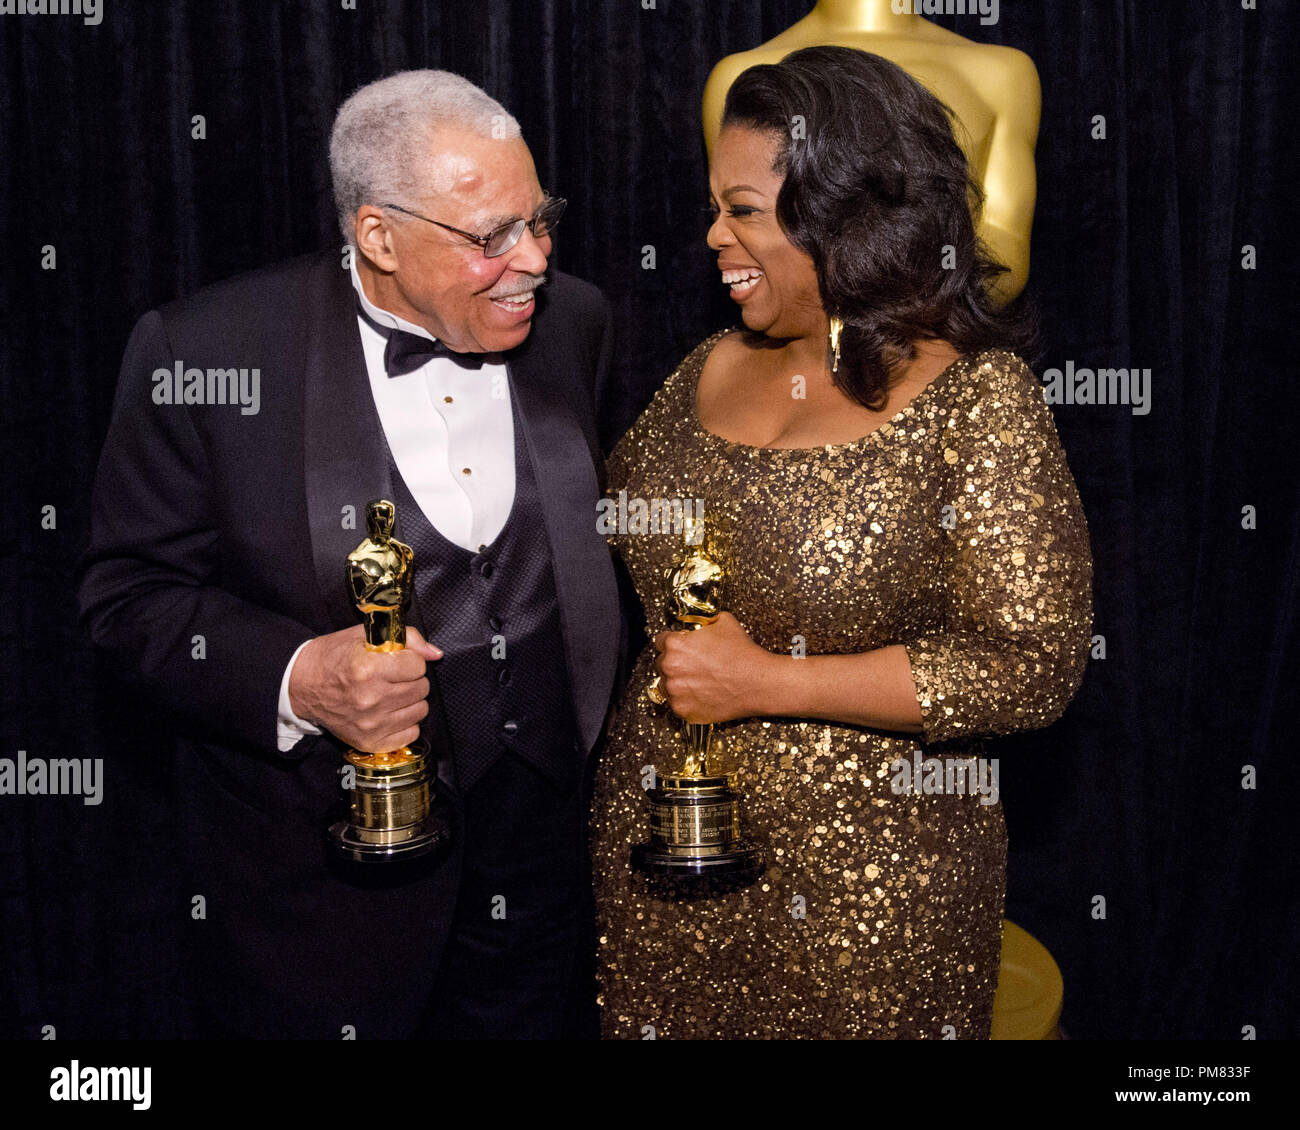 Honorary Award Recipient James Earl Jones and Jean Hersholt Humanitarian  Award Recipient, Oprah Winfrey backstage during the live ABC Television  Network broadcast of the 84th Annual Academy Awards from the Hollywood and